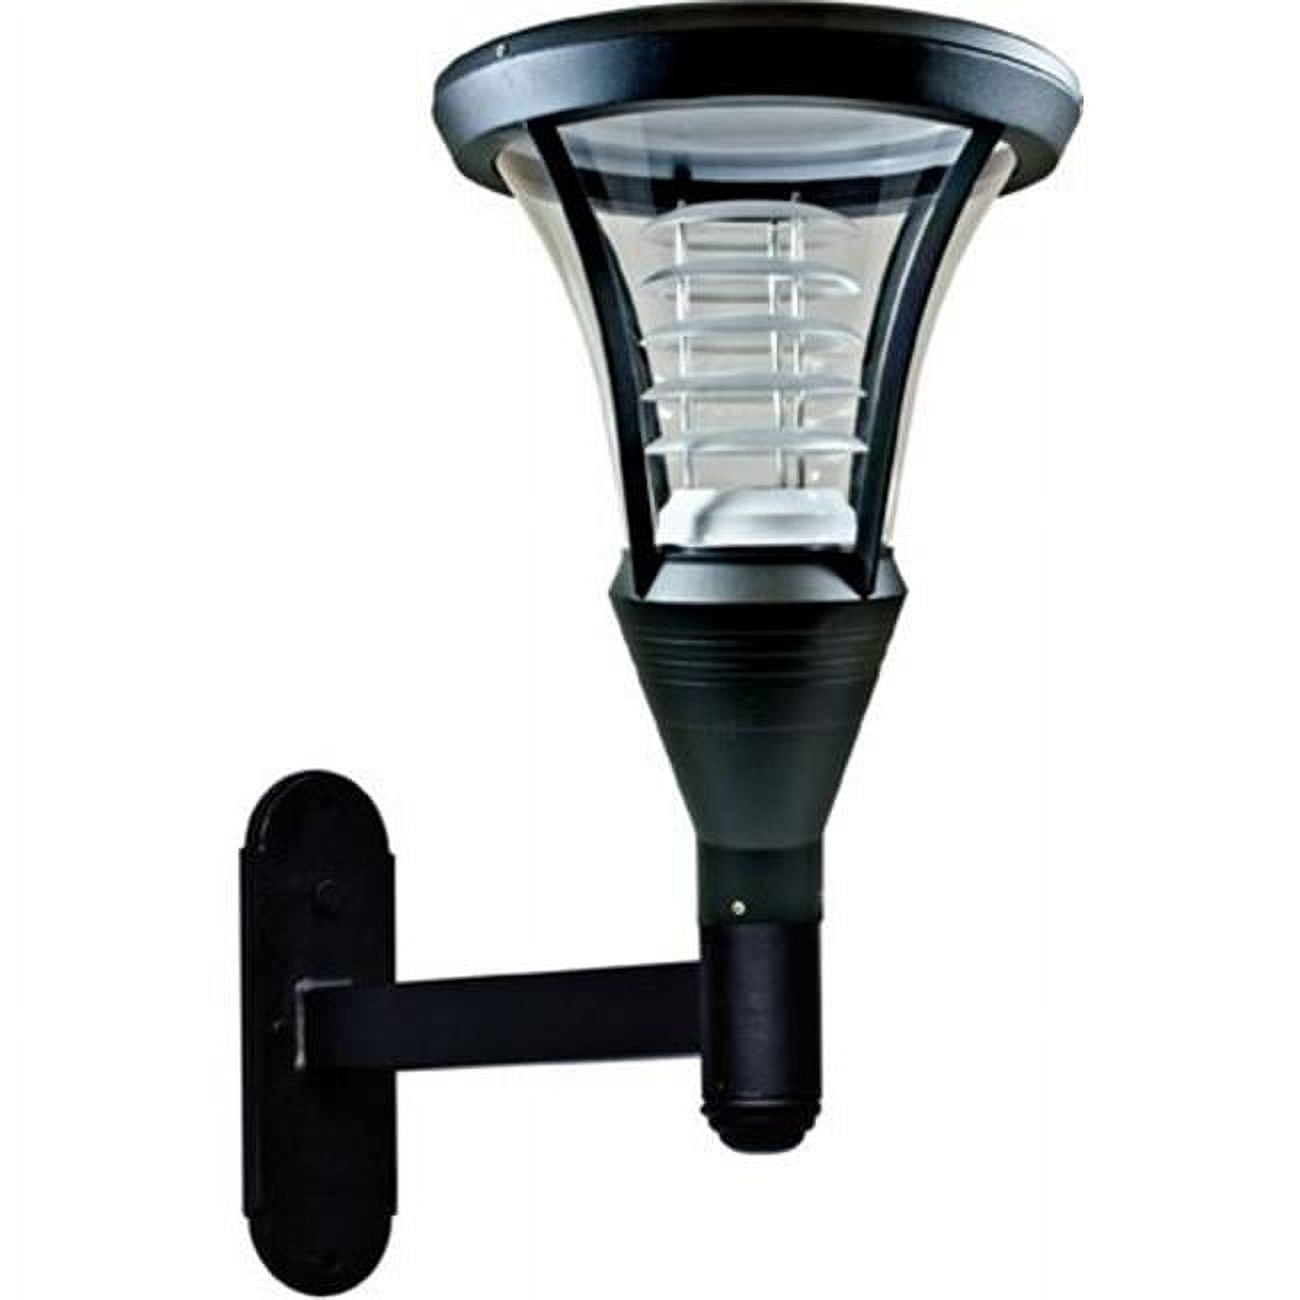 Picture of Dabmar Lighting GM632-B 50W 120V Powder Coated Cast Aluminum Wall Light Fixture with High Pressure Sodium Lamp, Black